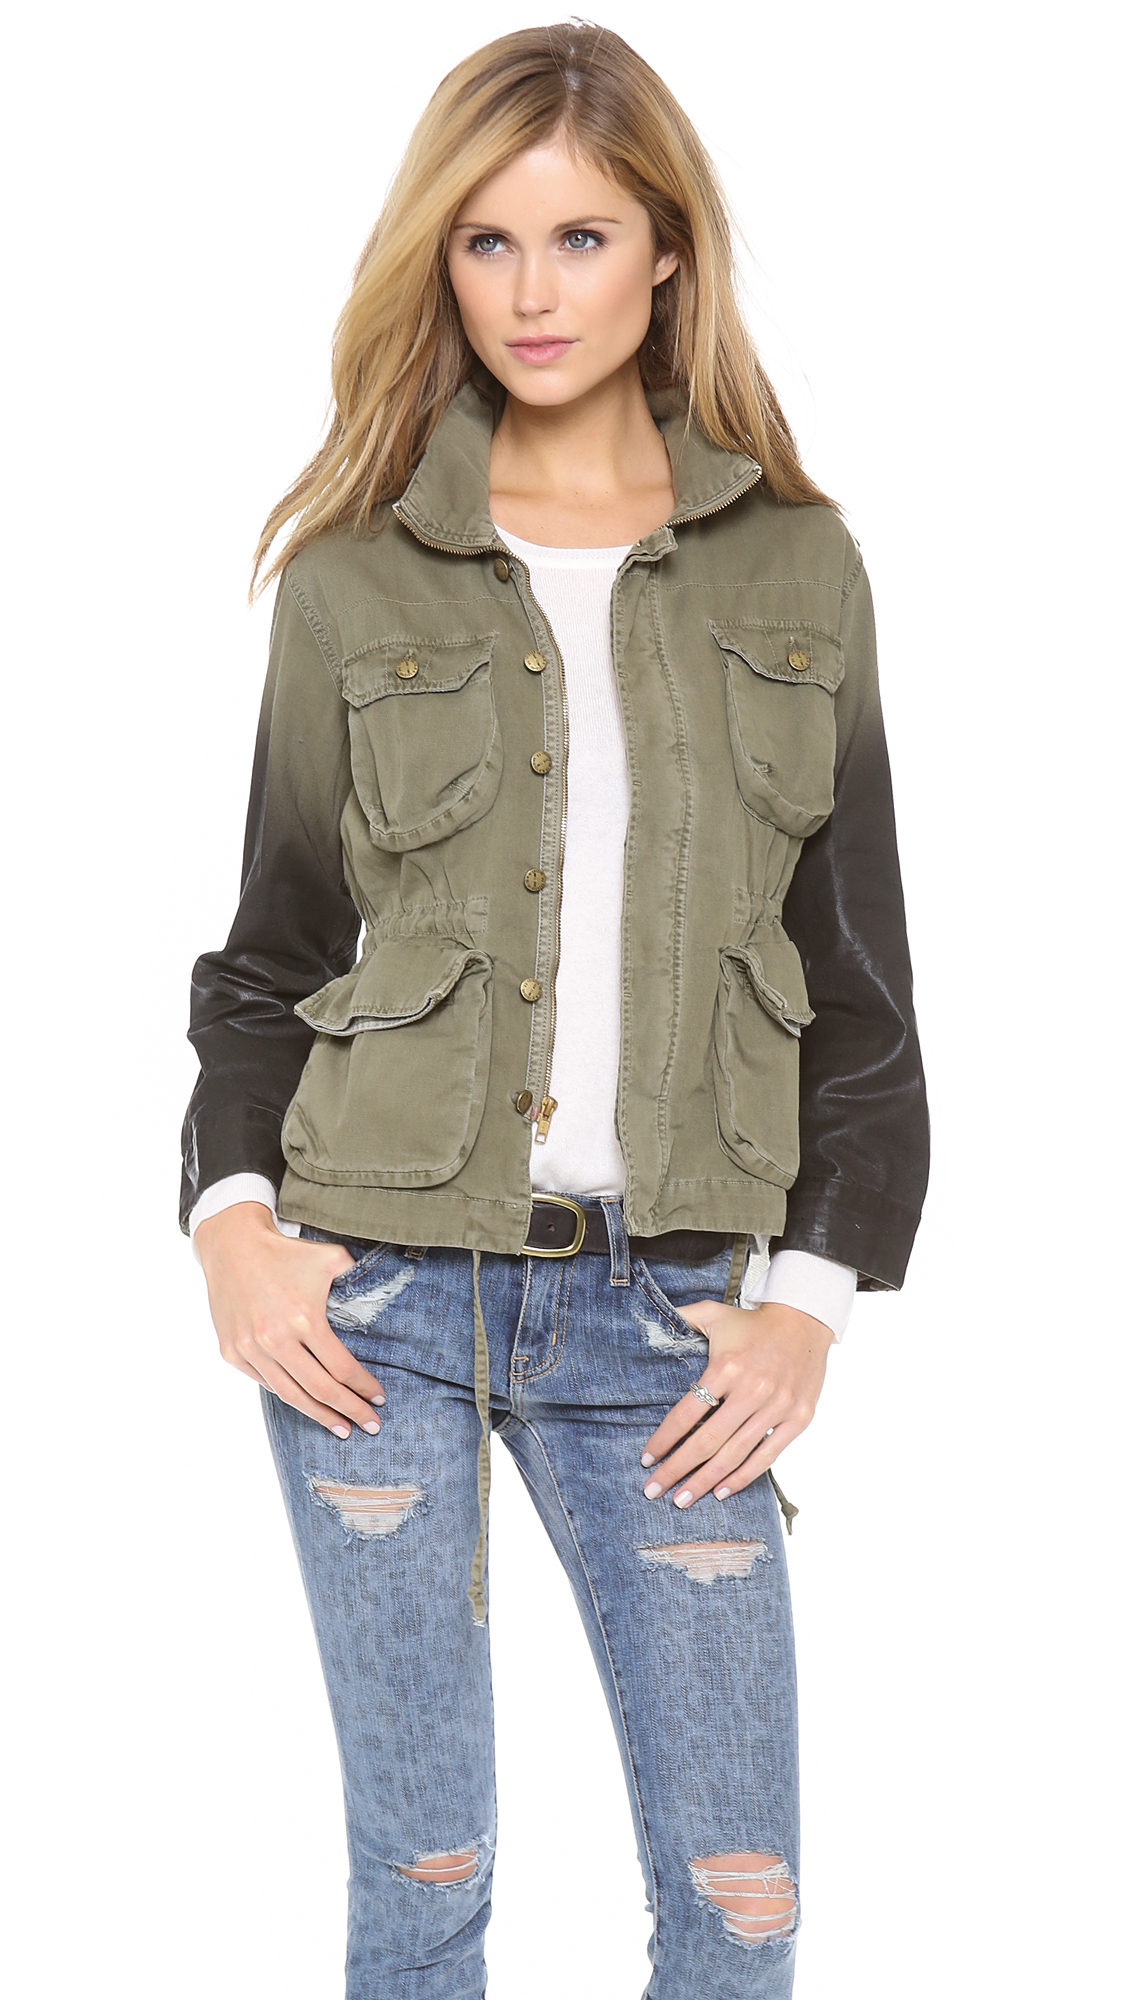 Lyst - Current/Elliott The Lone Soldier Jacket with Coated Sleeves in Green